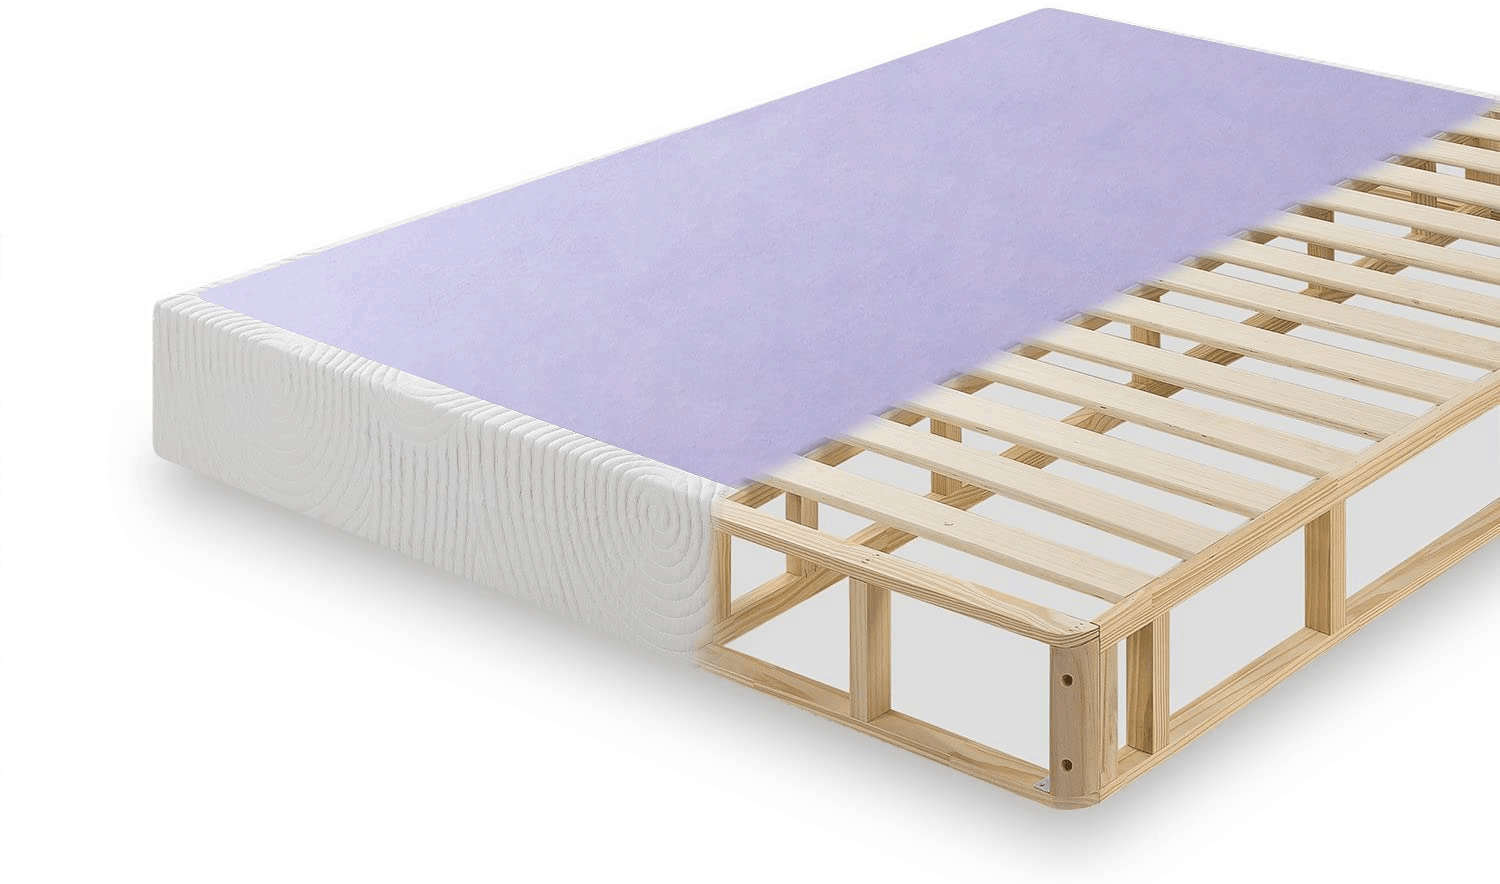 Do You Need a Mattress Foundation? Guide, Tips, and Tricks